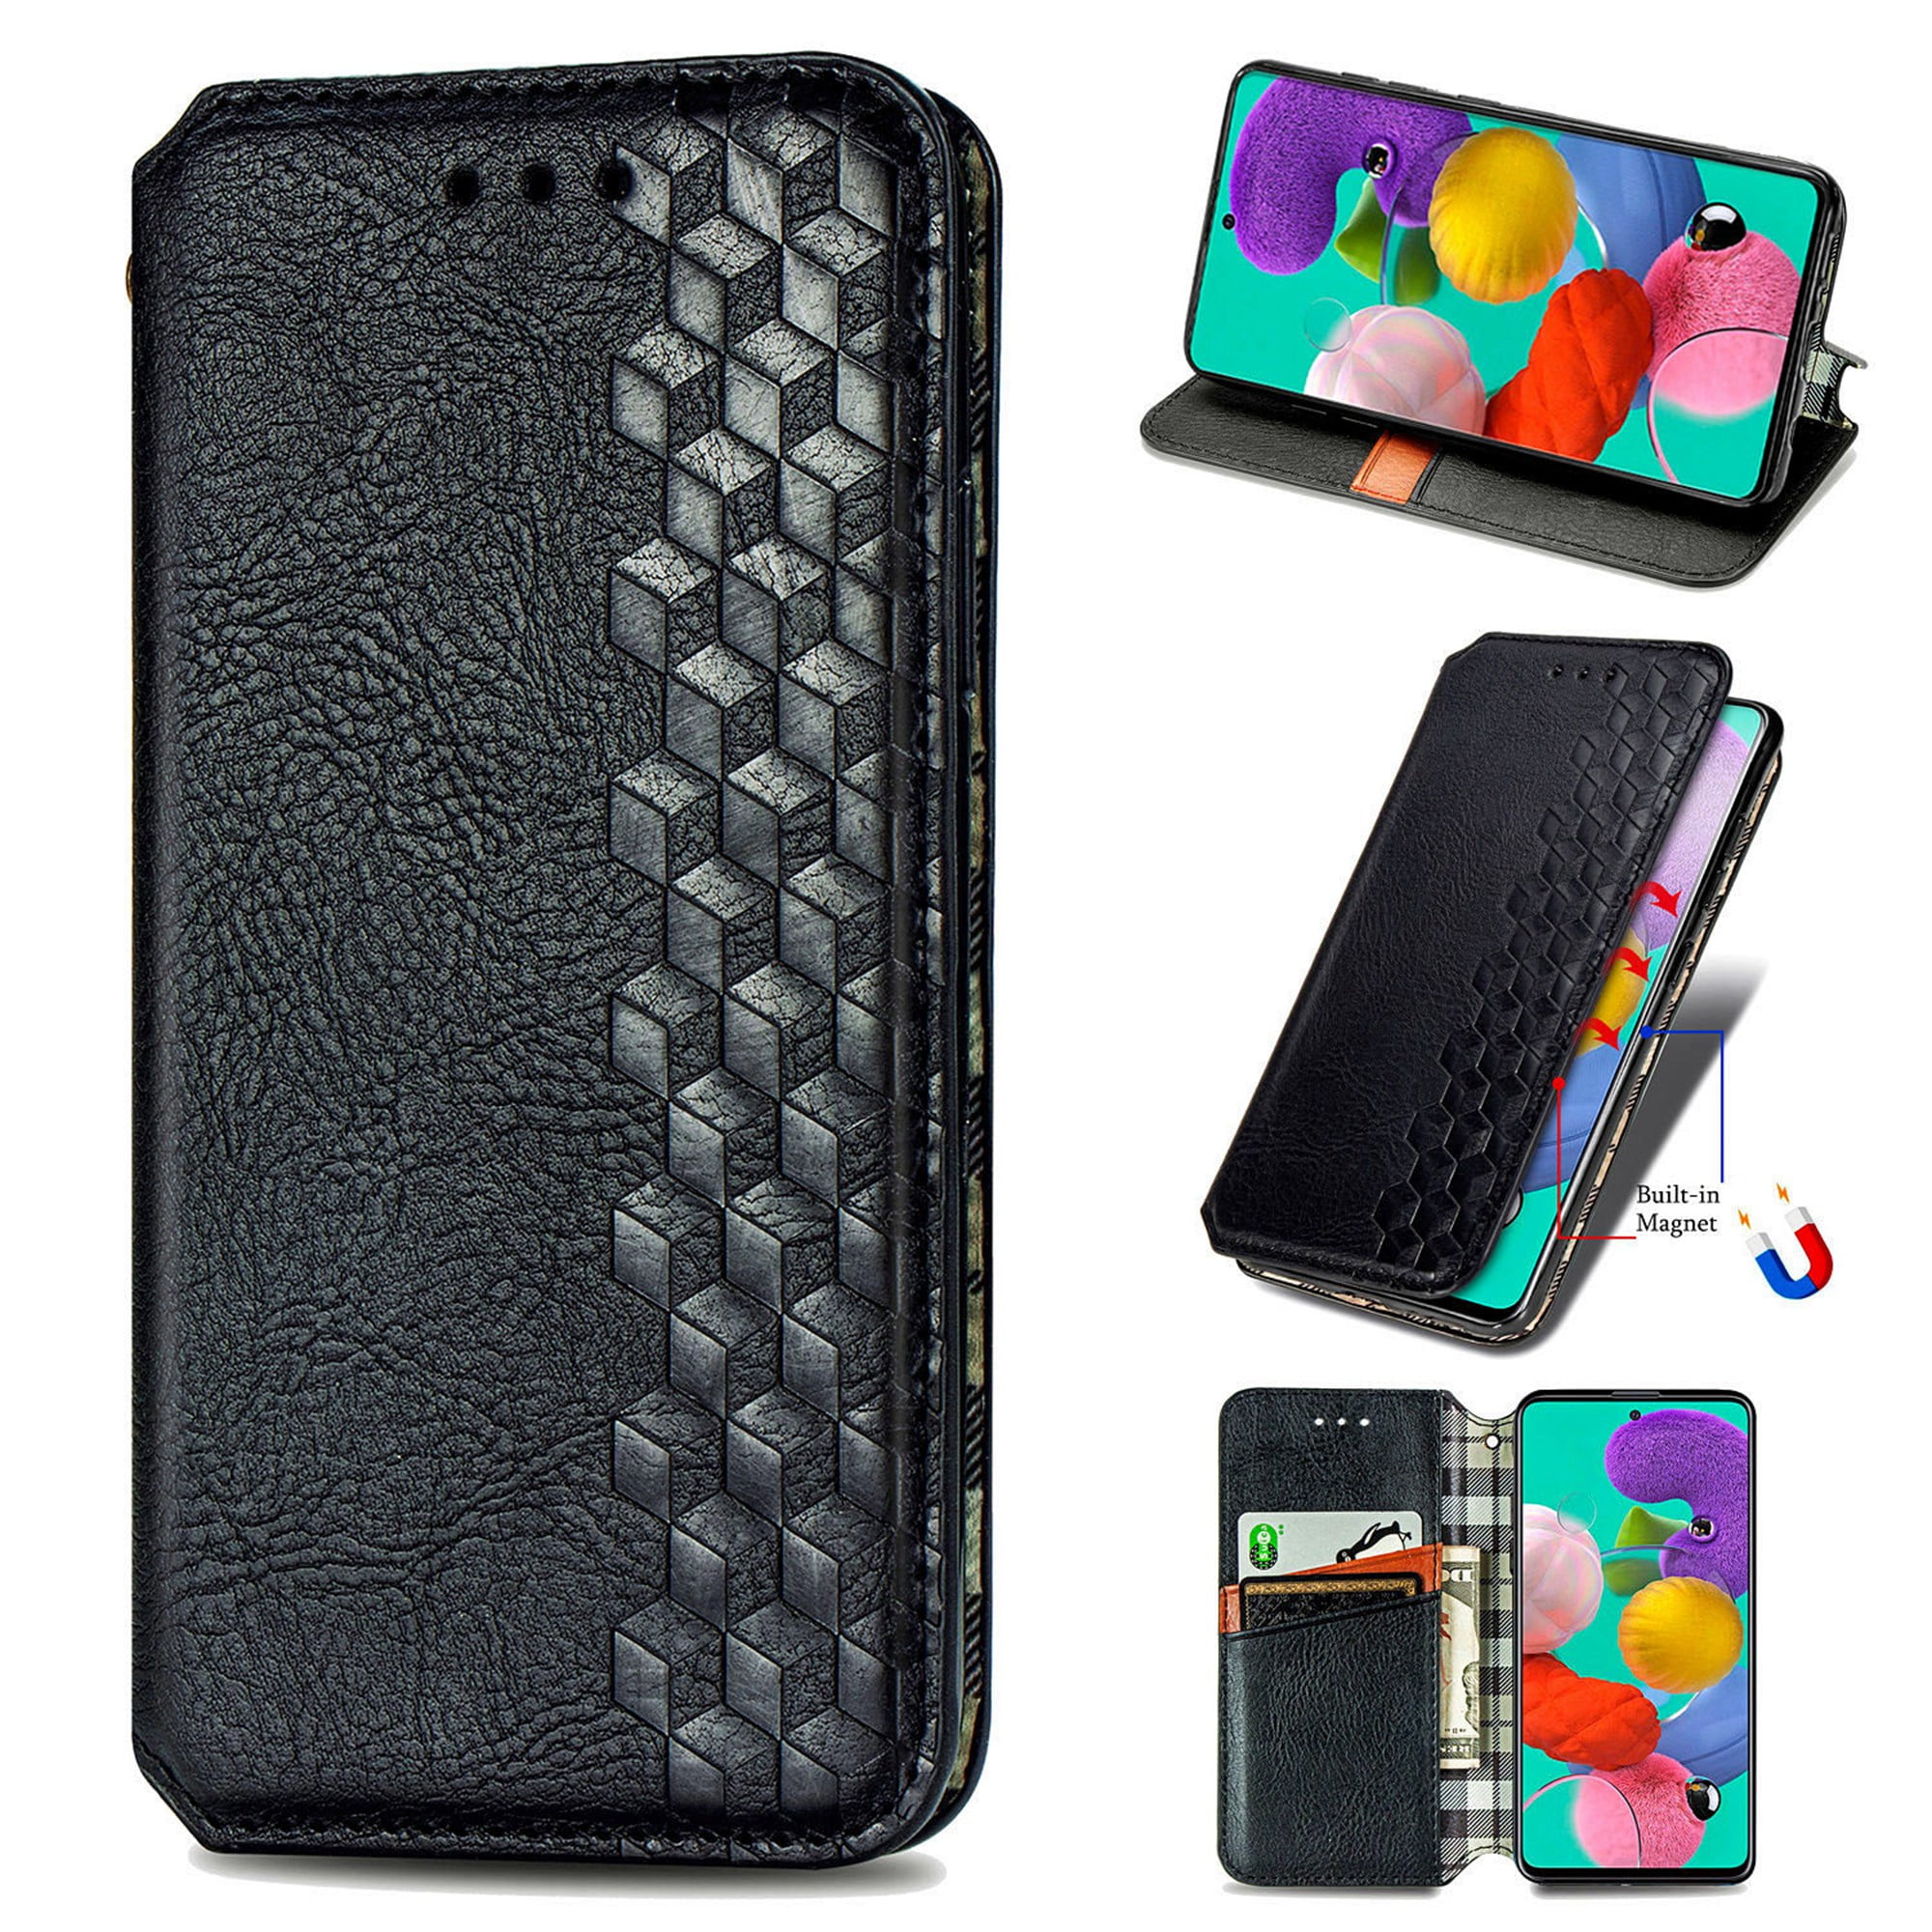 Dteck Case For Samsung Galaxy A71 5G (6.7 inches),Luxury Leather Wallet ...